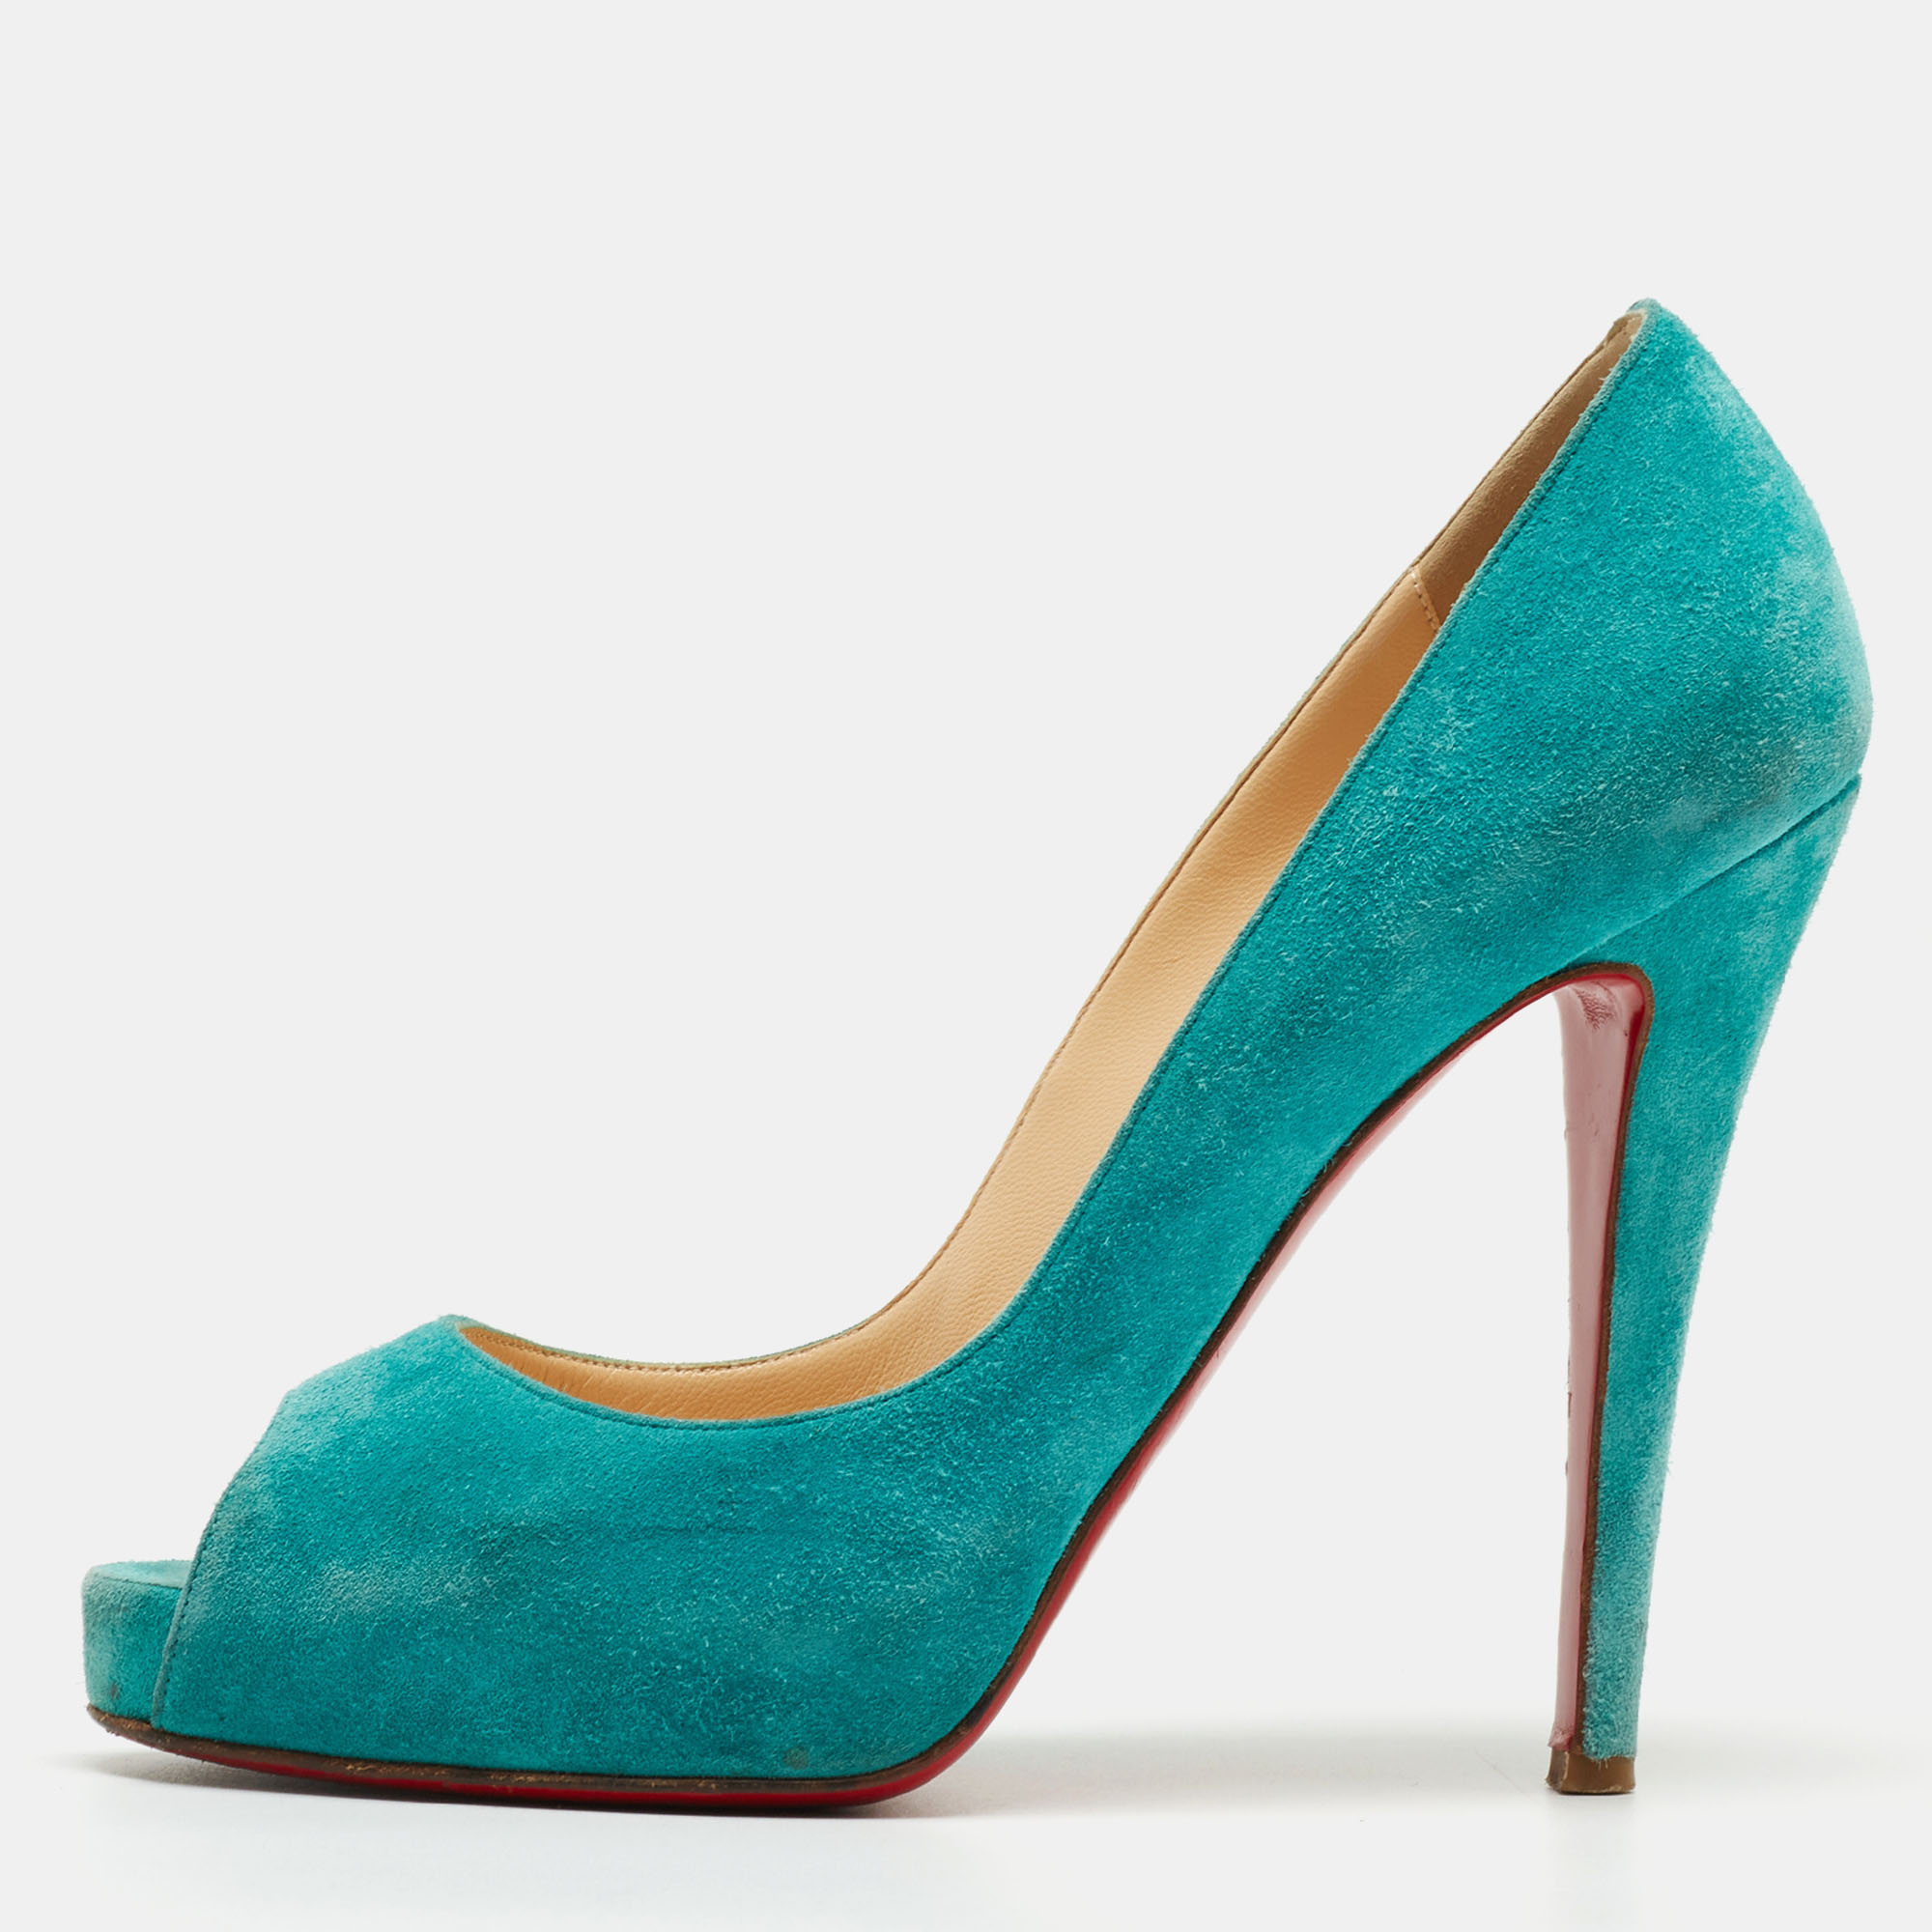 Christian louboutin turquoise suede very prive pumps size 38.5